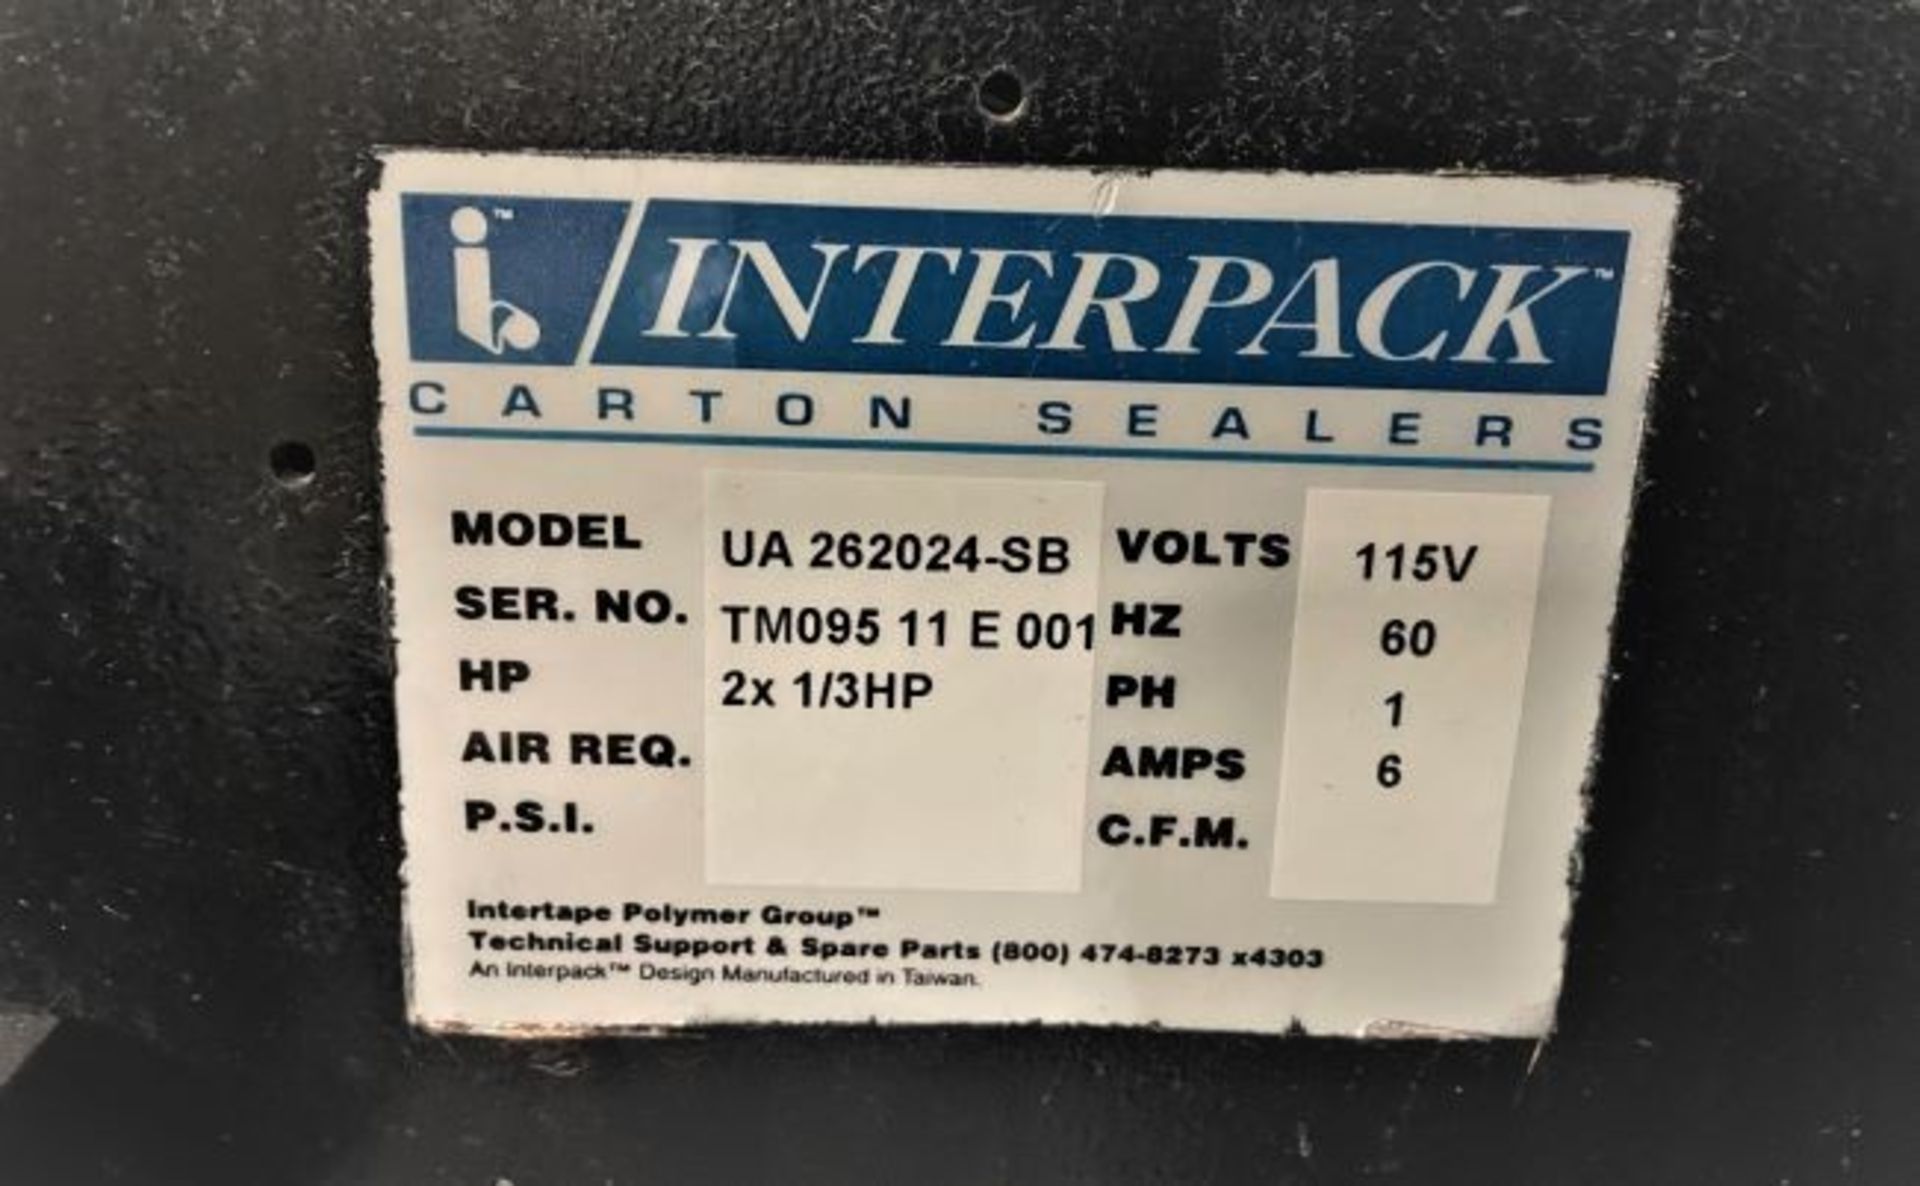 Interpack Top and Bottom Case Sealer Taper, Model UA 262024-B, S/N TM09511 E 001 with Autoflap, - Image 4 of 8